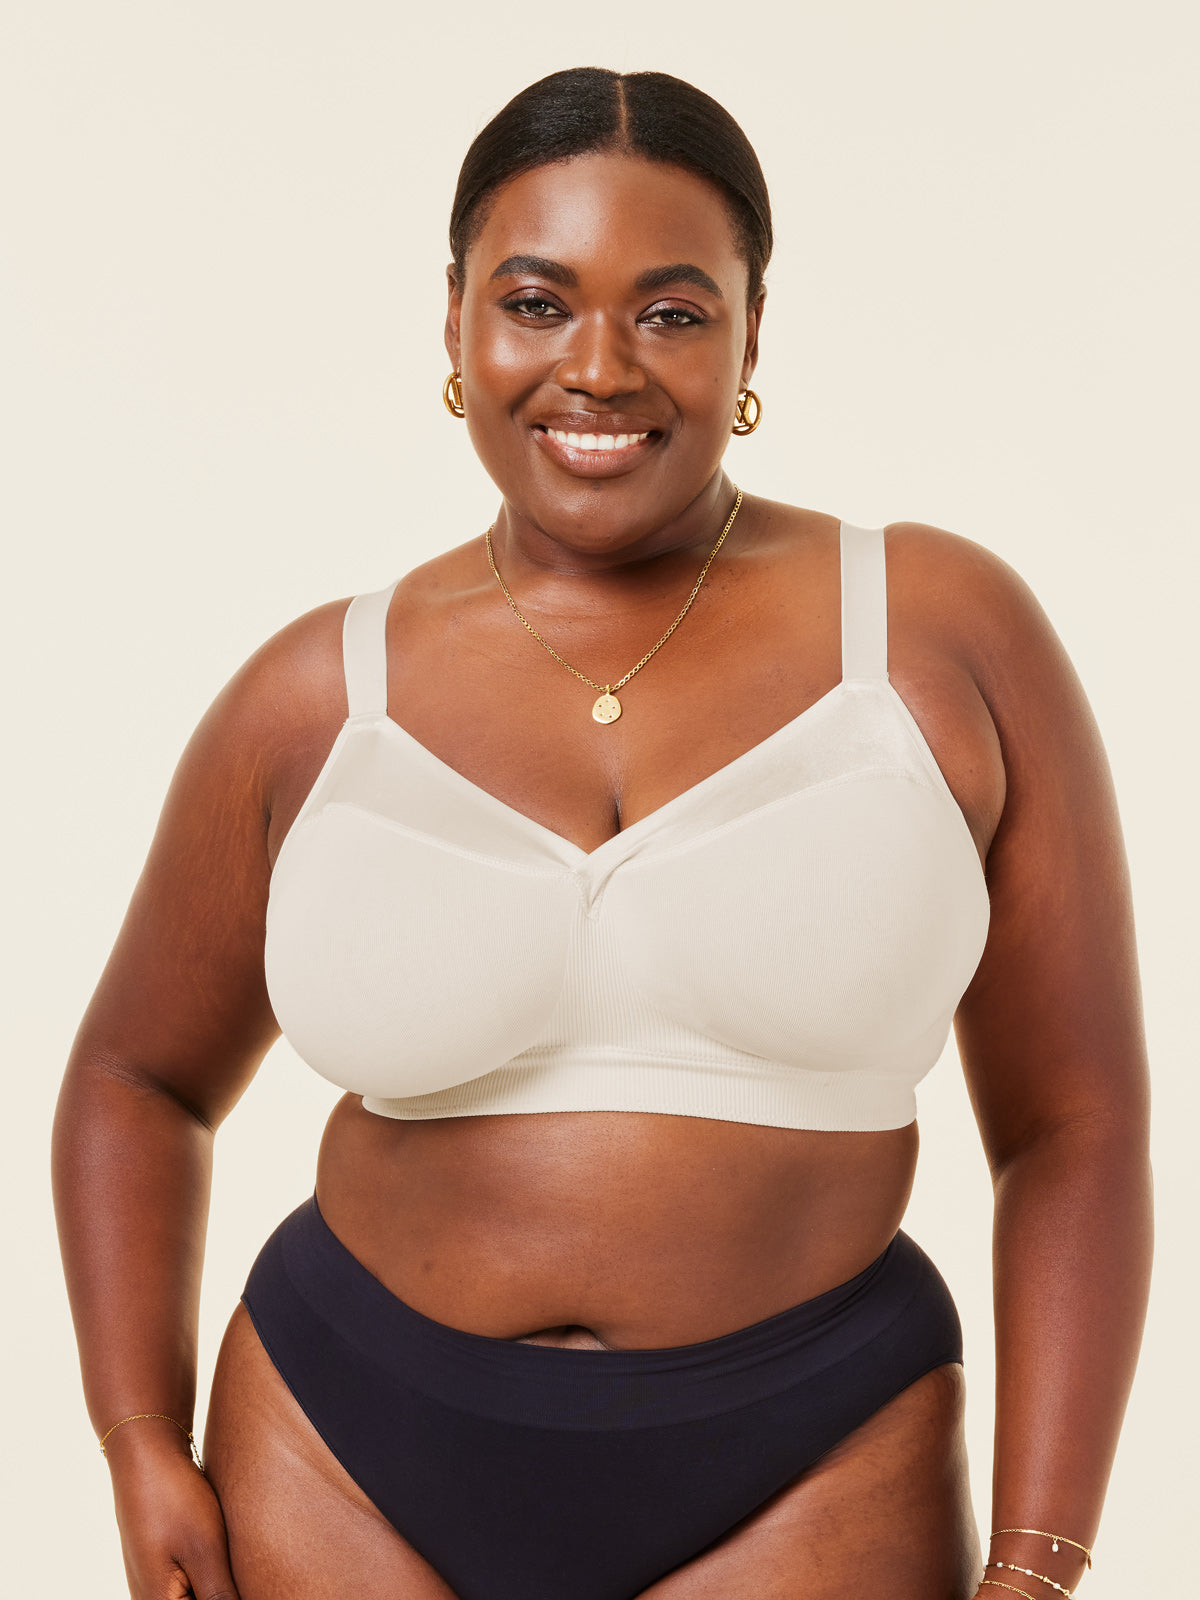 White Knit Bralet Best Bra for Saggy Breasts After Breastfeeding